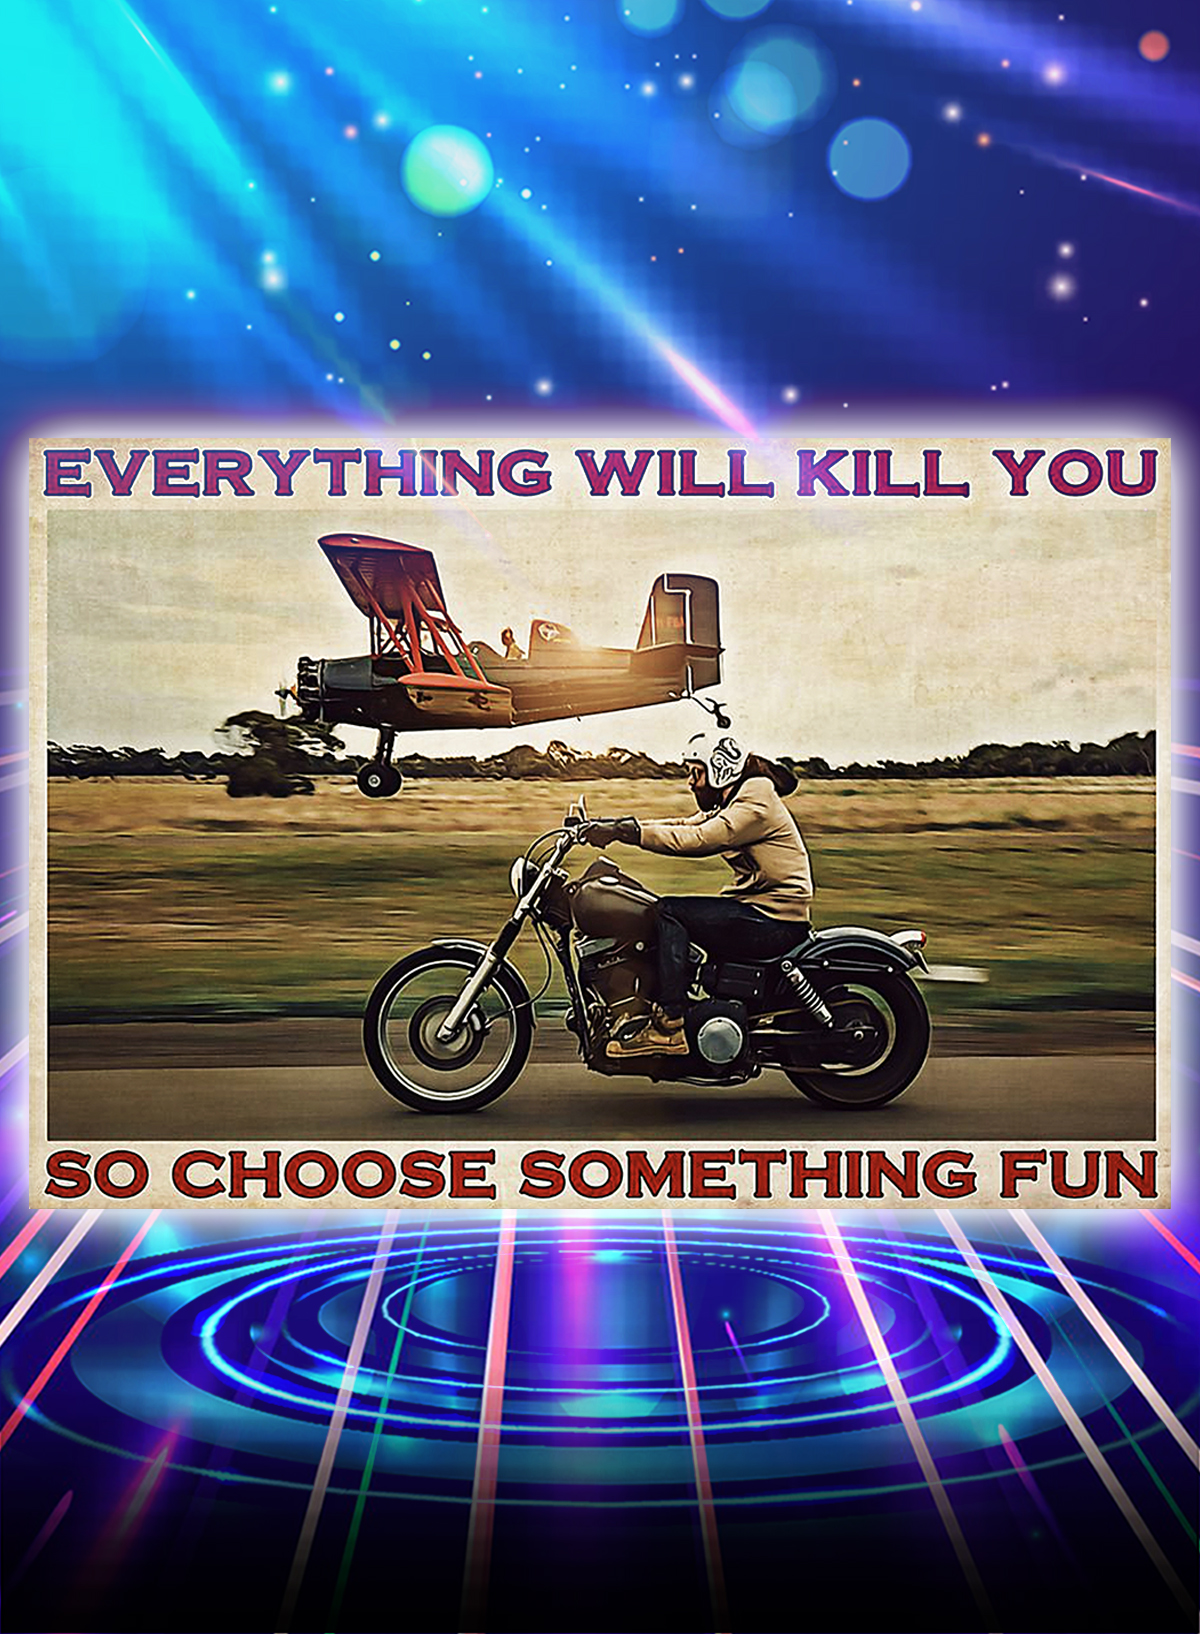 Motorbike planes everything will kill you so choose something fun poster - A4